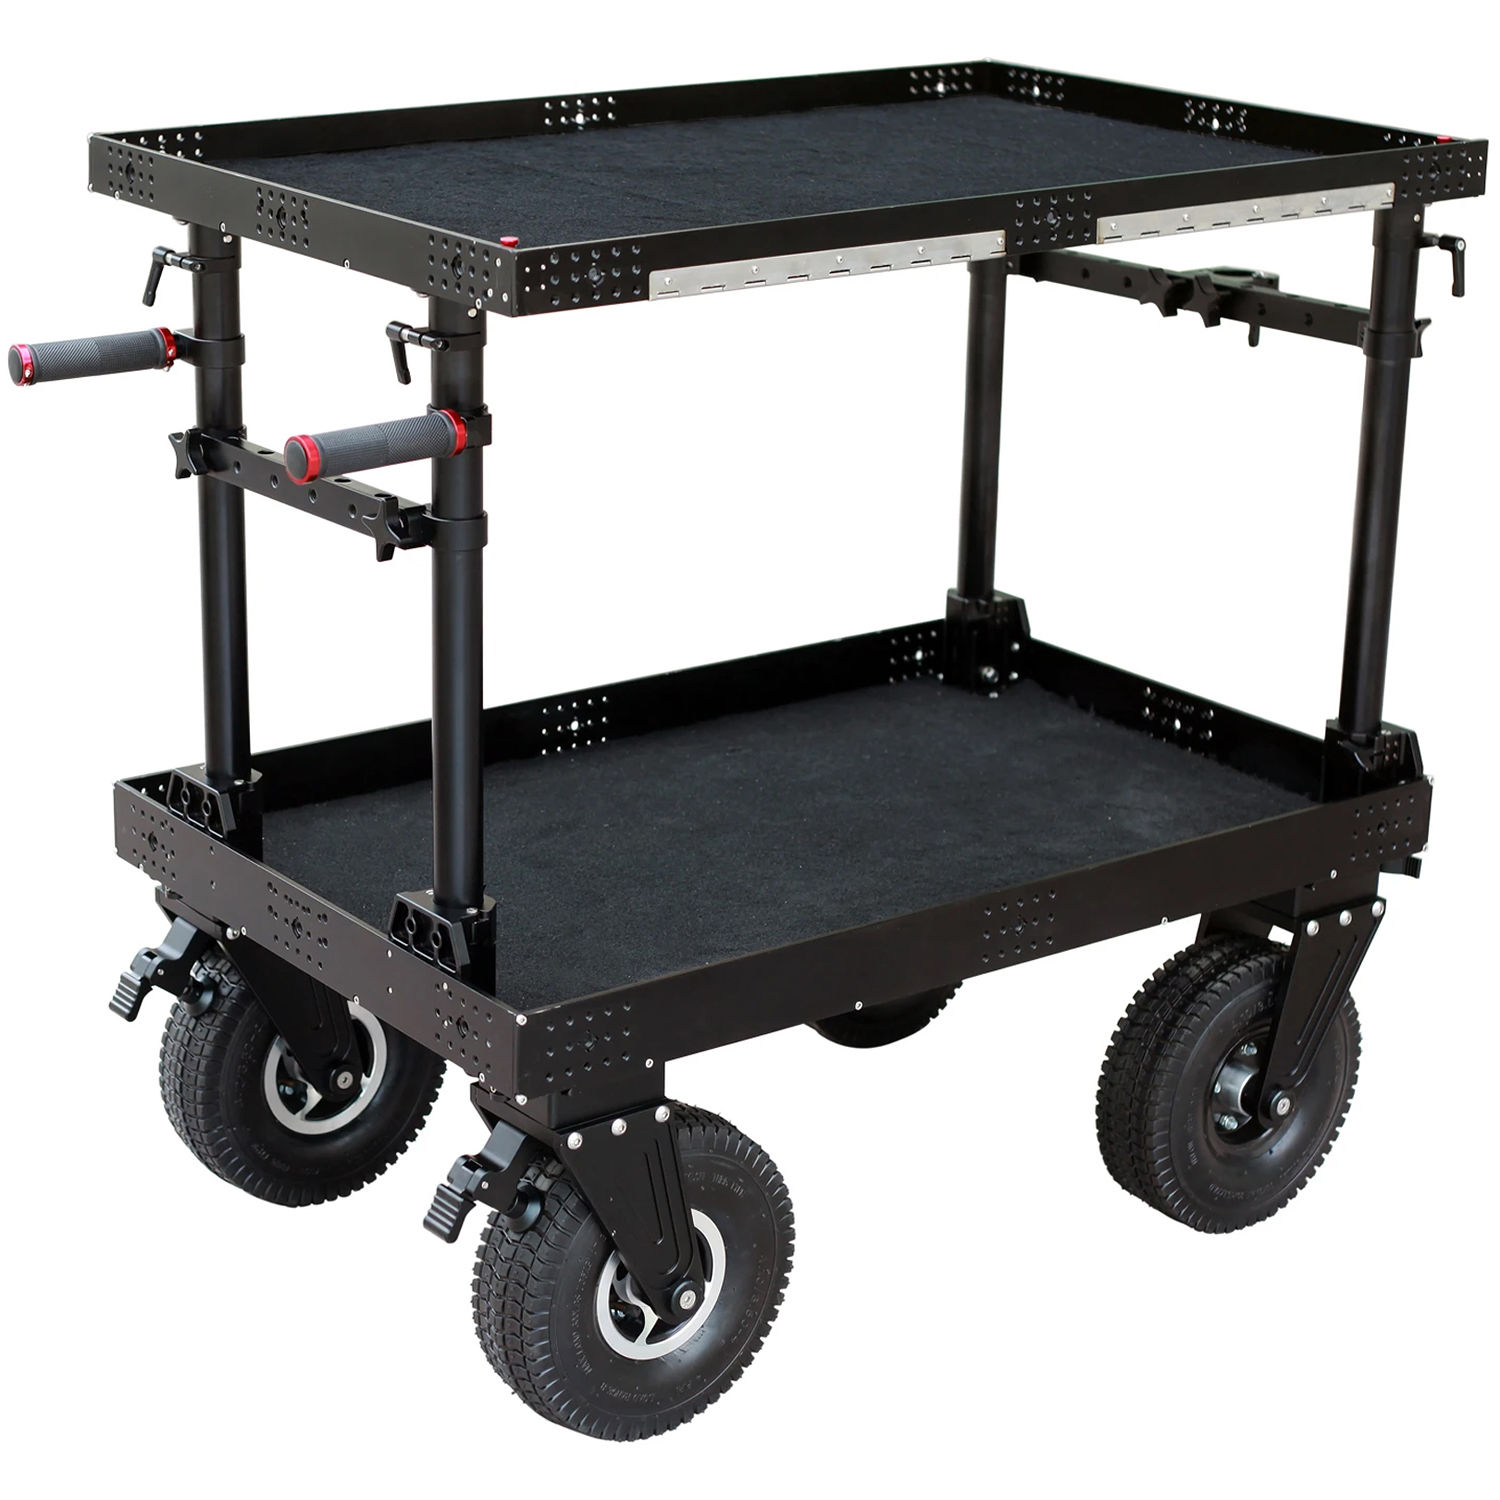 Product cart